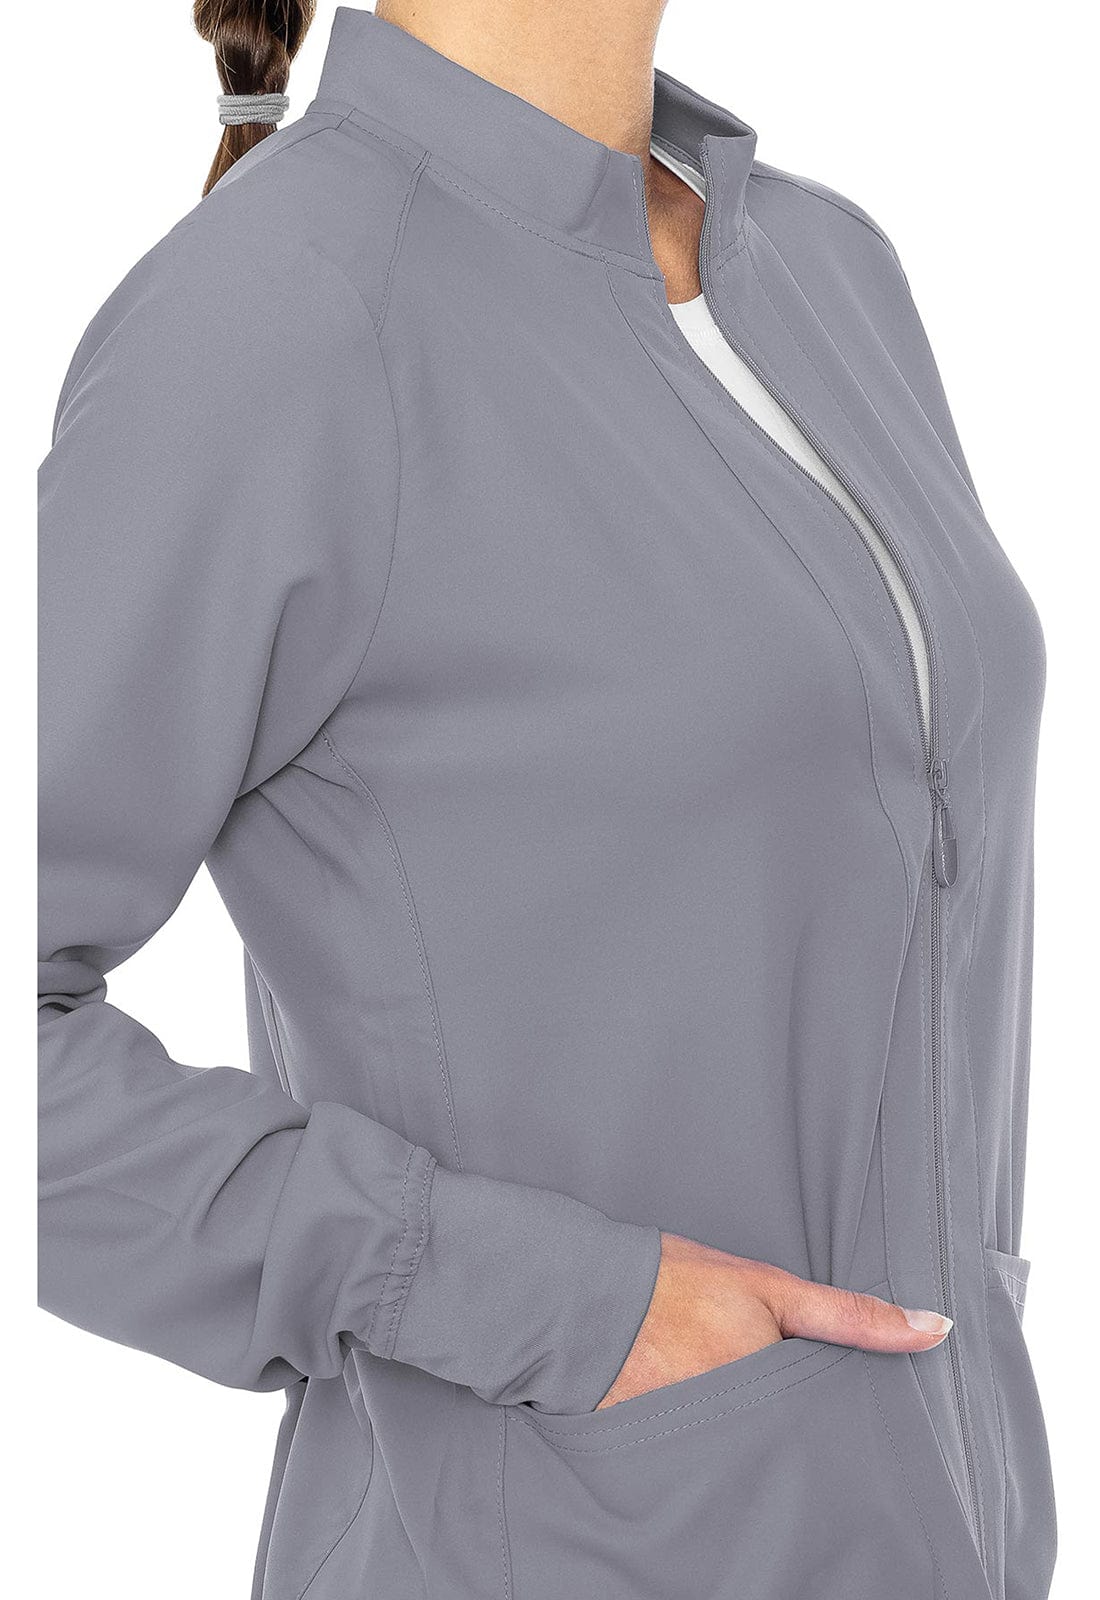 Med Couture MC Insight MC Insight  Zip Front Warm-Up Scrub Jacket With Shoulder Yokes MC2660